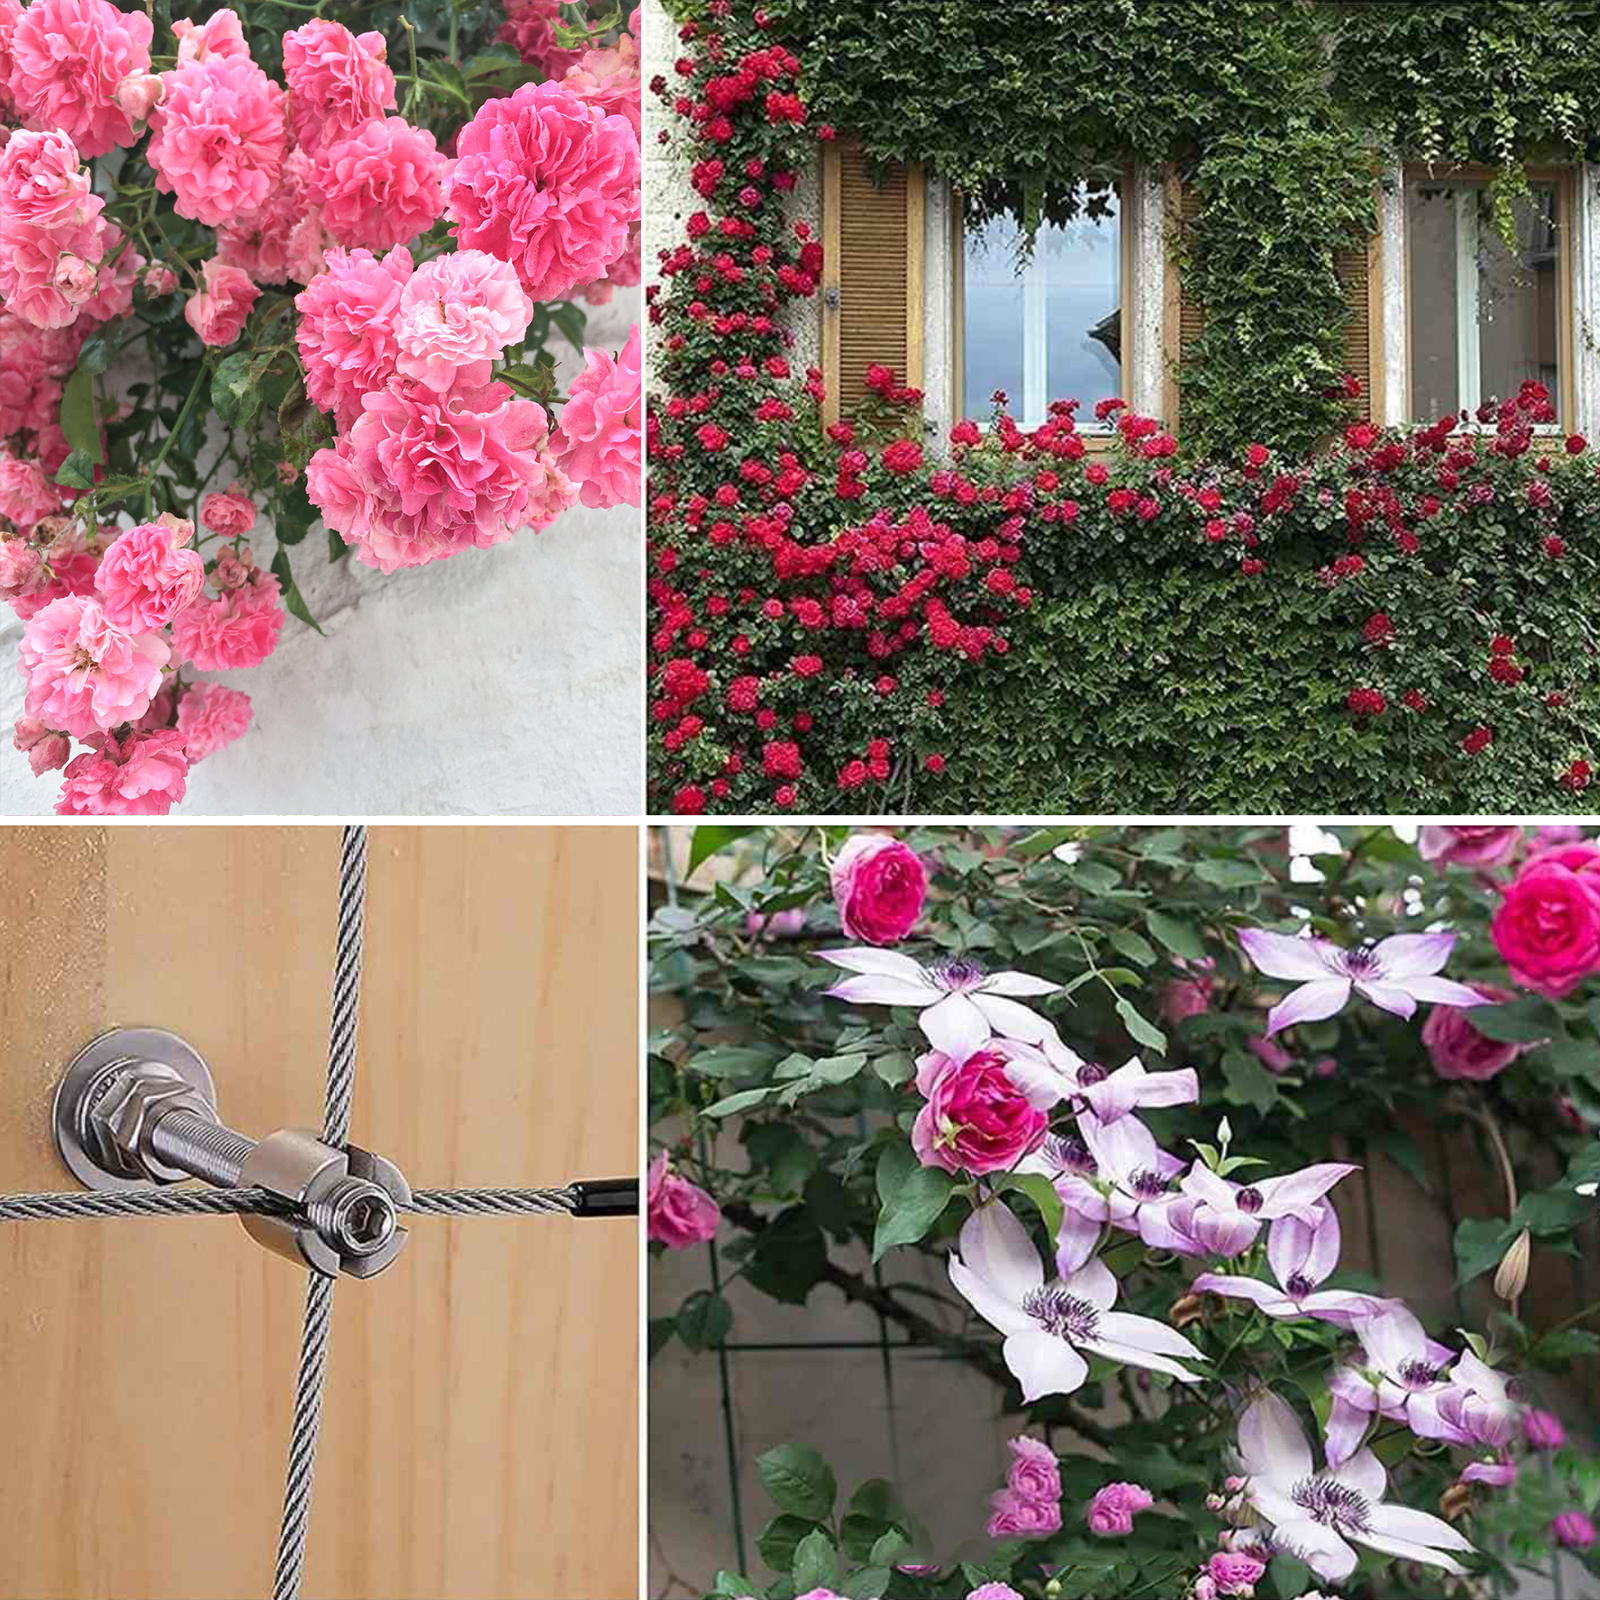 37pcs Stainless Steel Trellis For Climbing Plants System Complete Set for Wire Rope Cable Garden Vines Green Walls